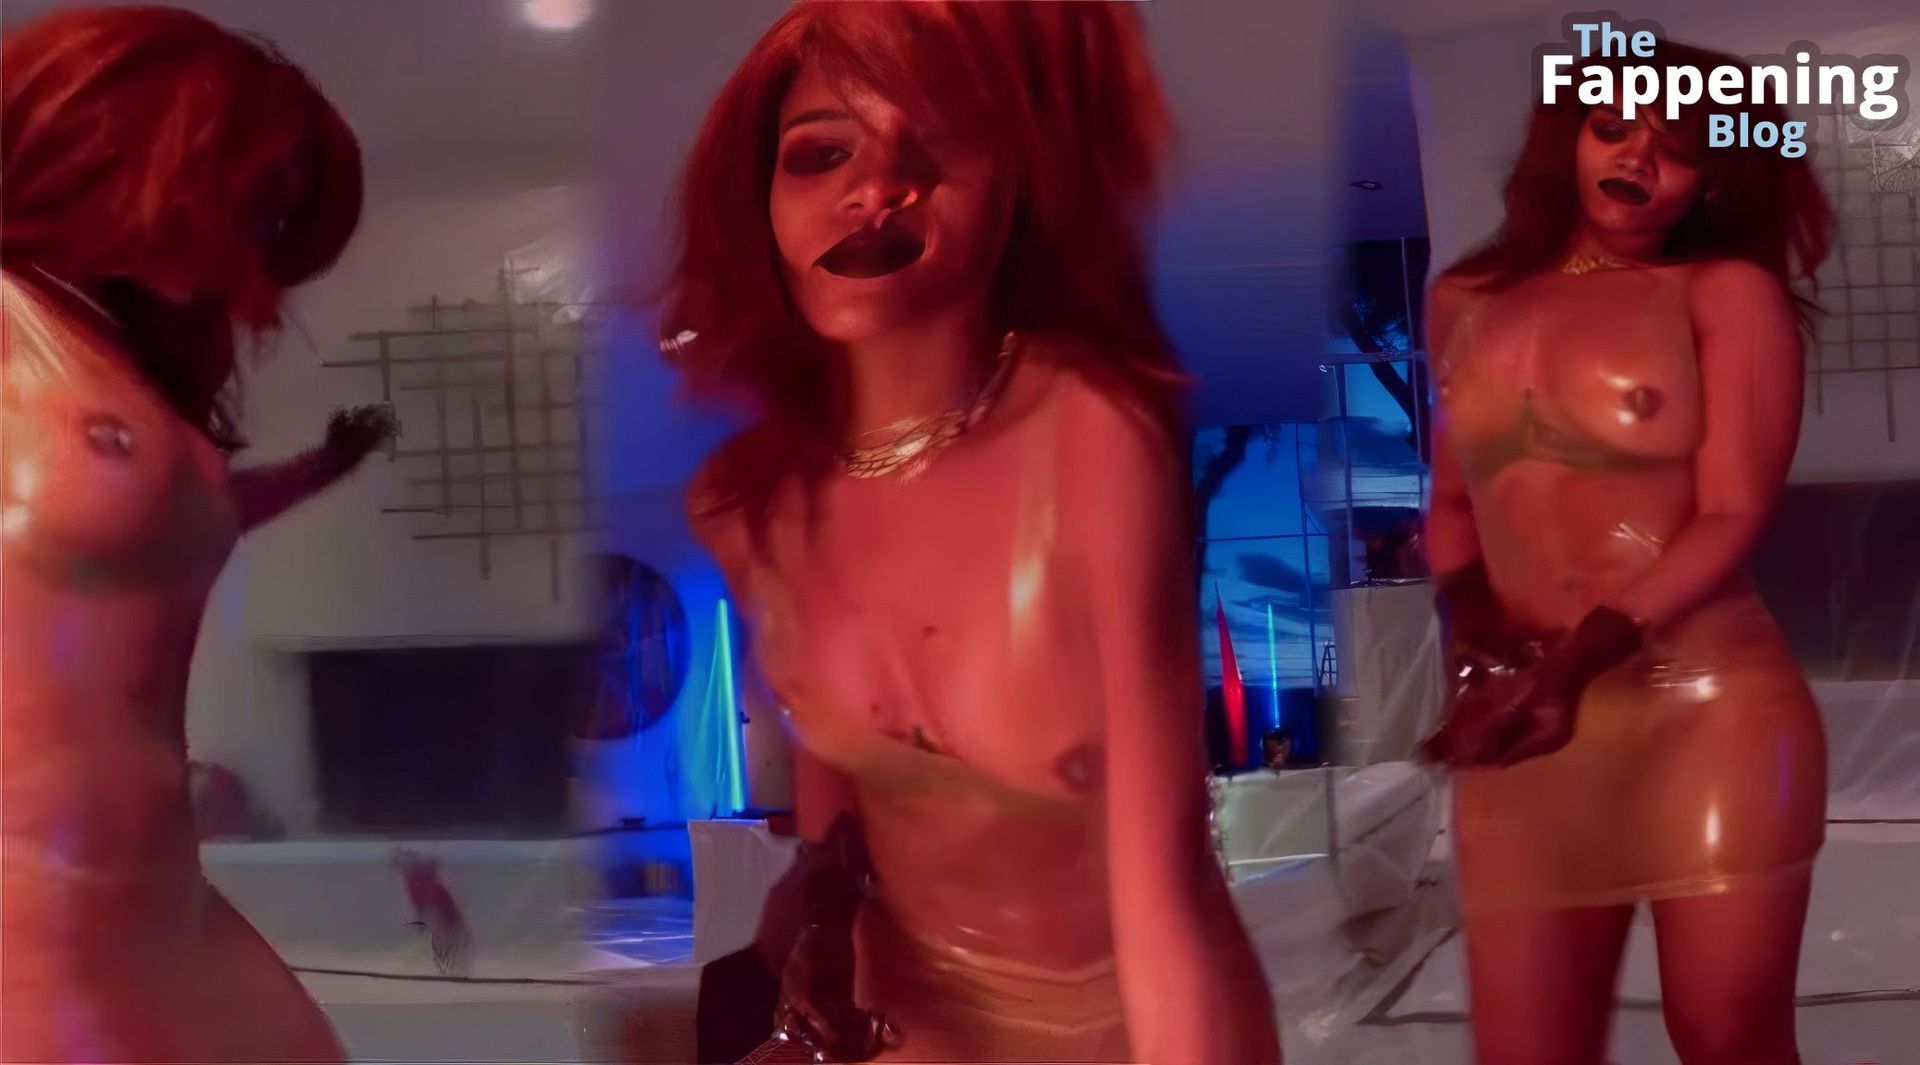 Rihanna-Naked-Tits-in-Transparent-Outfit-2-thefappeningblog.com_.jpg